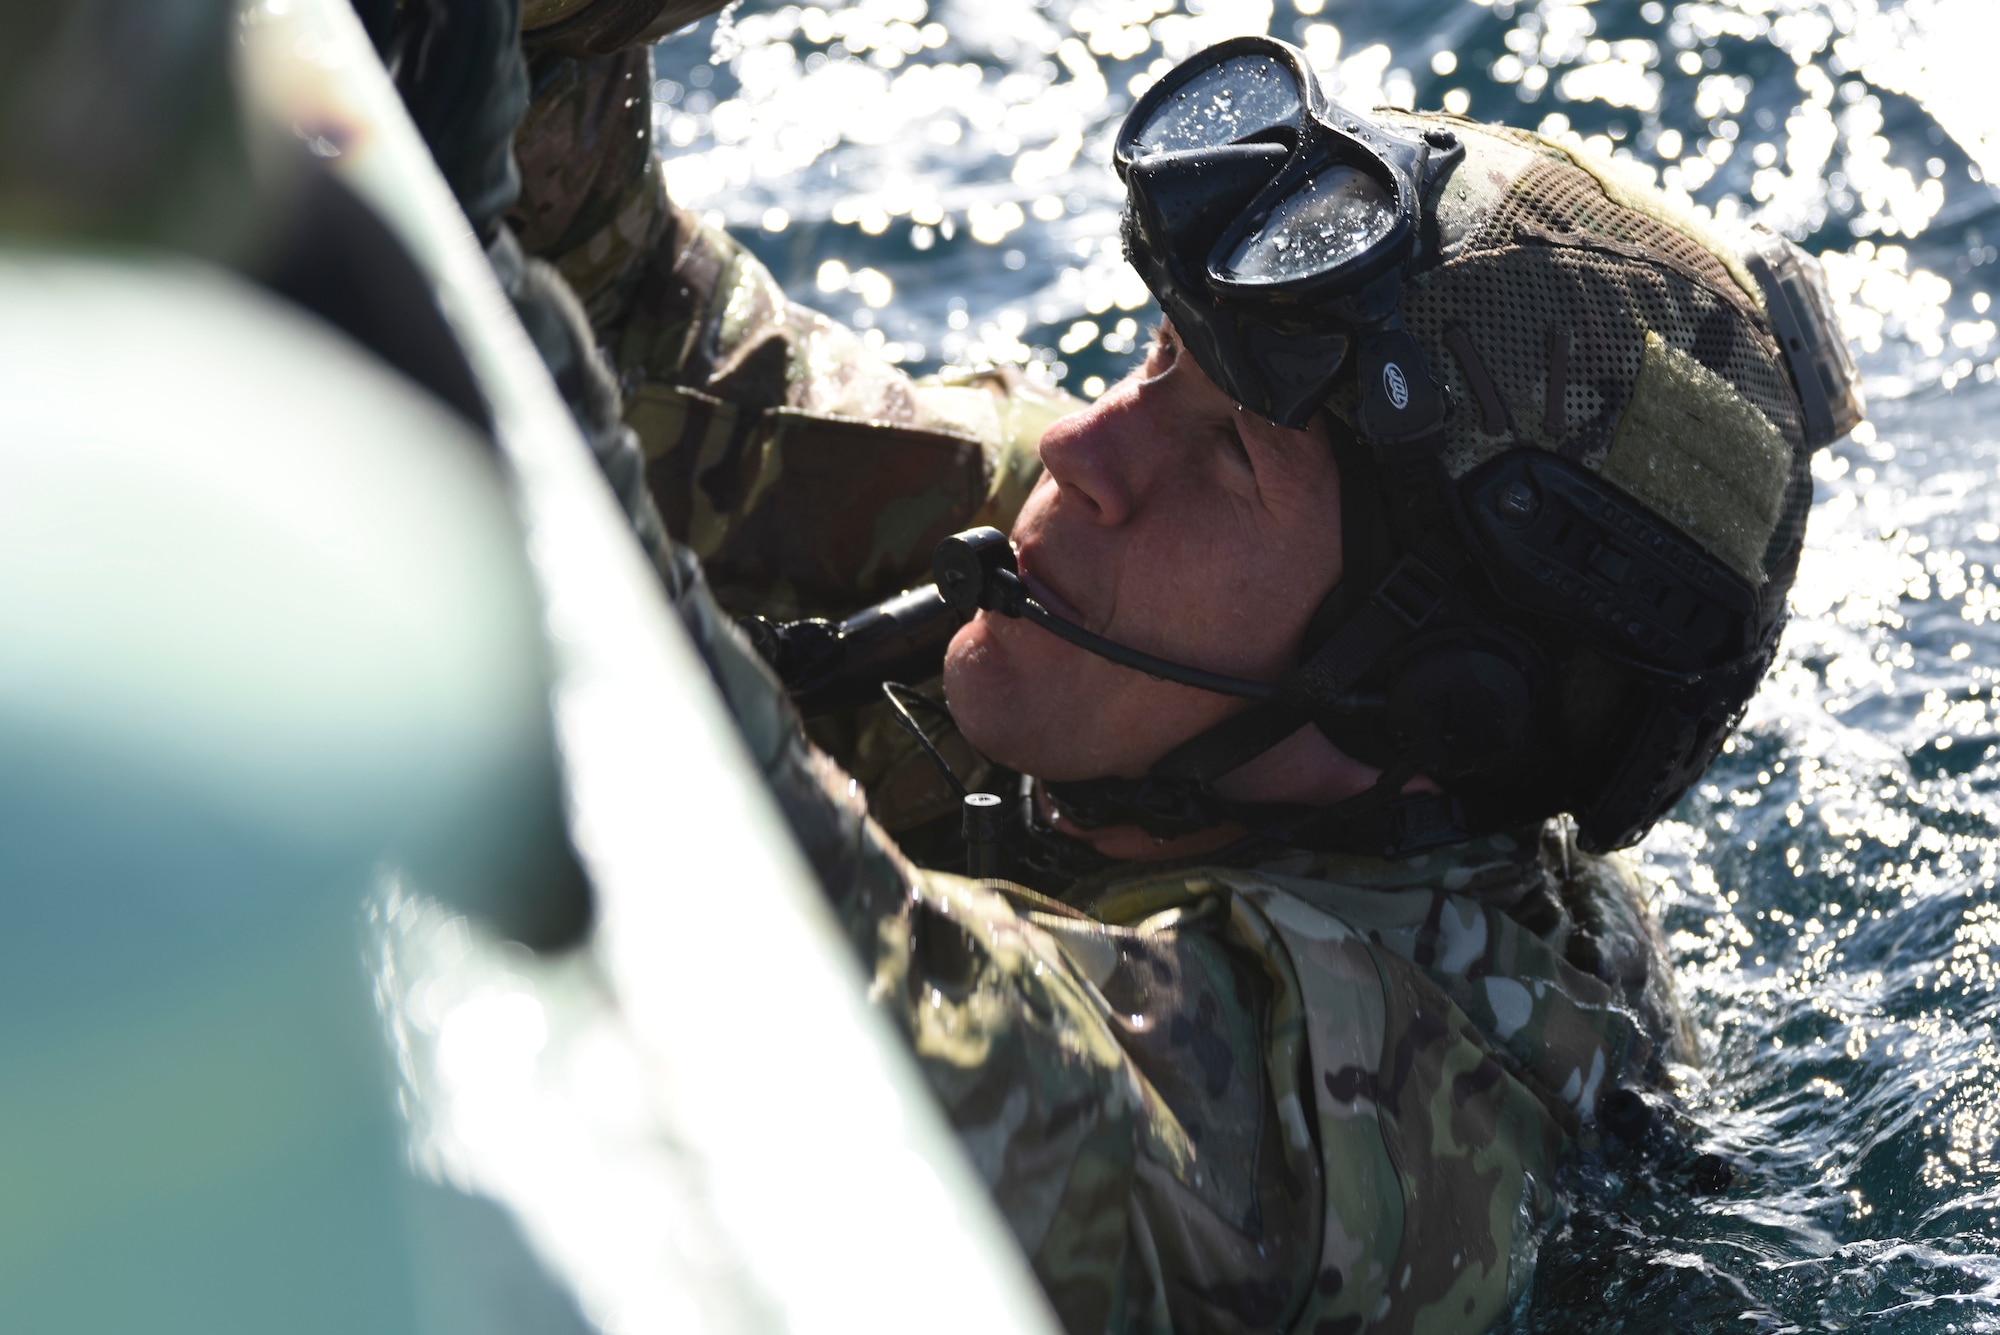 U.S. Air Force Capt. John Krzyminski, a 31st Rescue Squadron combat rescue officer from Kadena Air Base, Japan, grabs a helping hand from a team member for a combat search and rescue training mission during exercise Keen Sword 19, near Misawa Air Base, Japan, Oct. 31, 2019. Keen Sword is the ideal training scenario, allowing Japan Self-Defense Force and U.S. military forces to work together across a variety of areas and enhances the interoperability of U.S. and Japan forces. Exercises like Keen Sword demonstrate the United States’ and Japan’s strong commitment to a free and open Indo-Pacific region. (U.S. Air Force photo by Senior Airman Sadie Colbert)